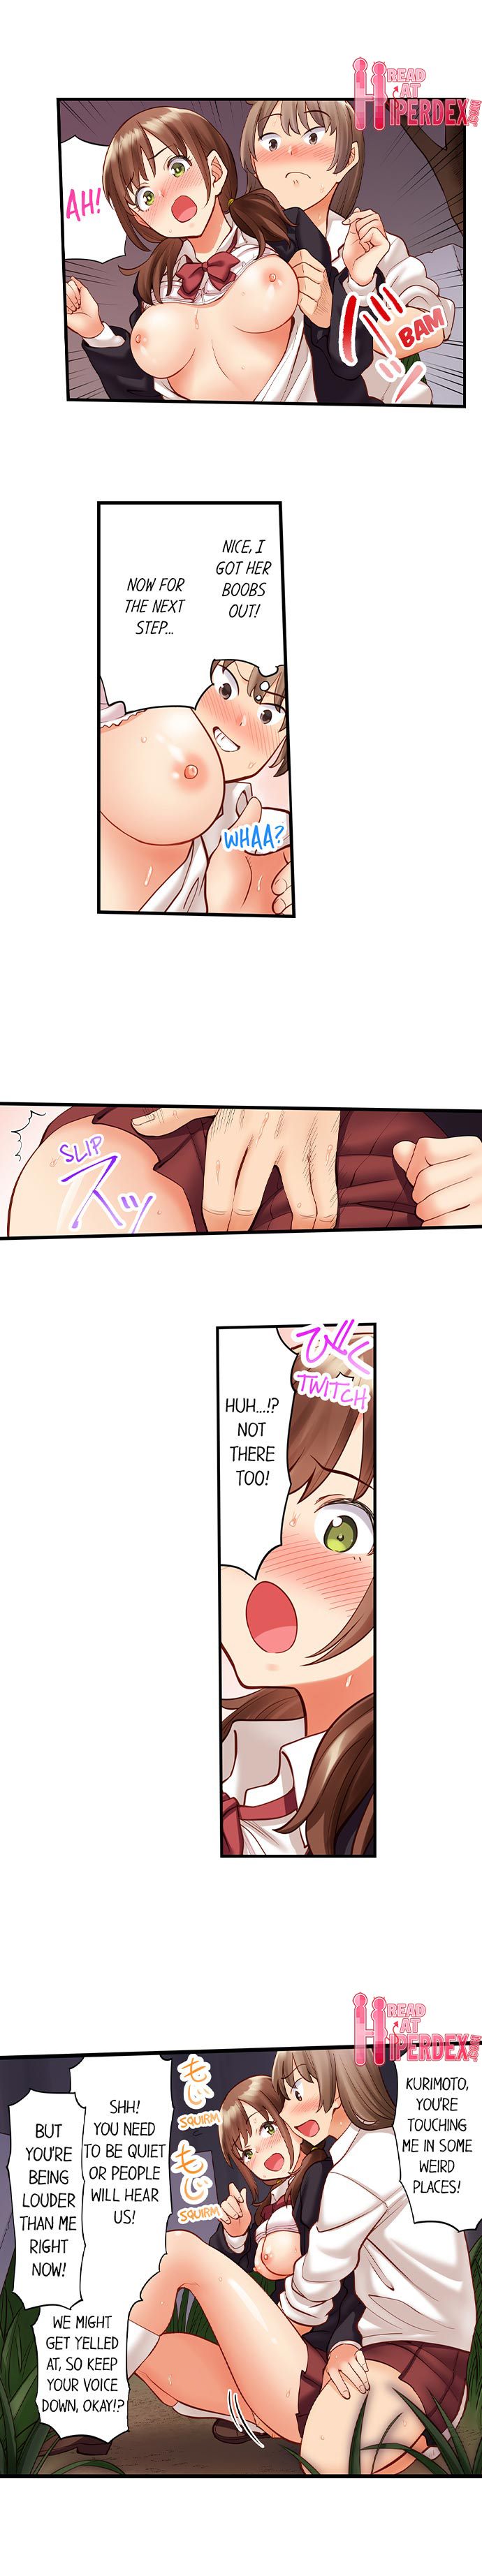 Oil Massage at the Culture Festival - Chapter 5 Page 4